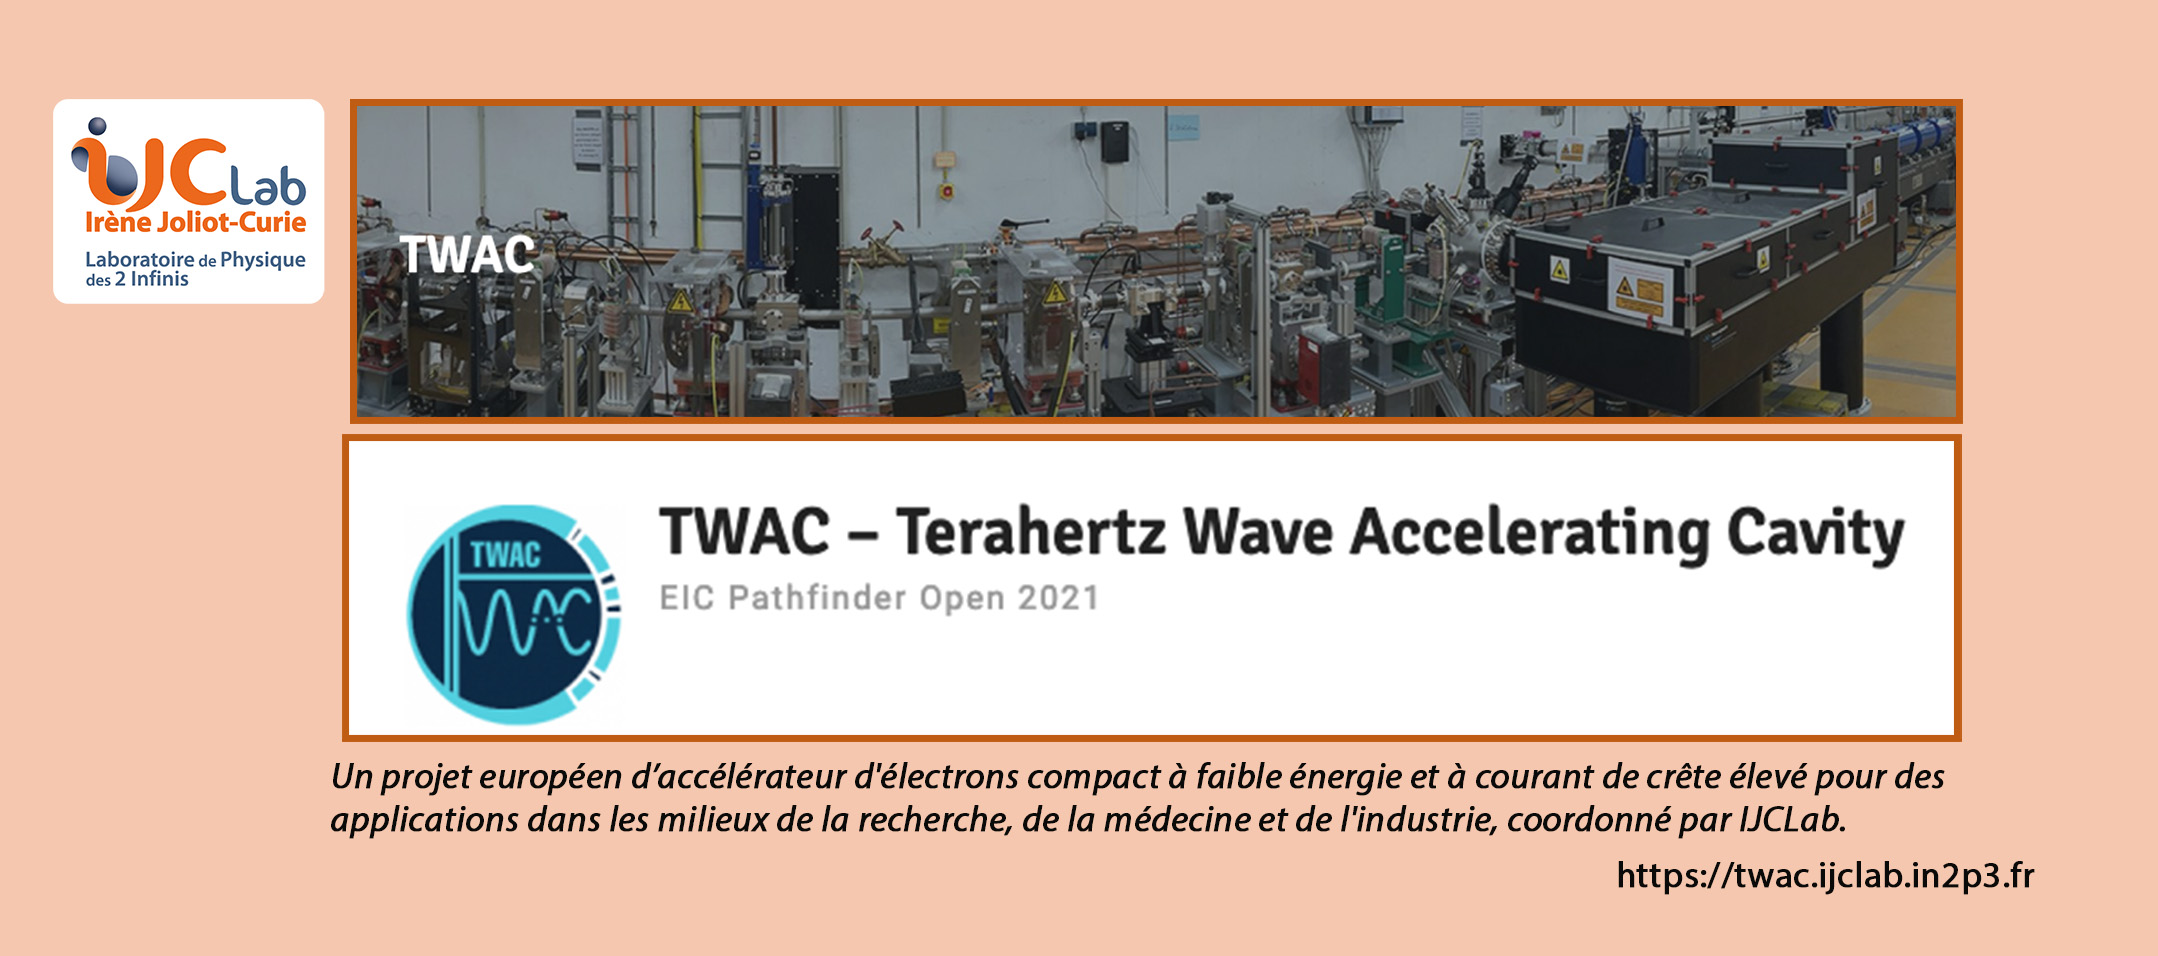 Spotlight on the European project TWAC coordinated by IJCLab